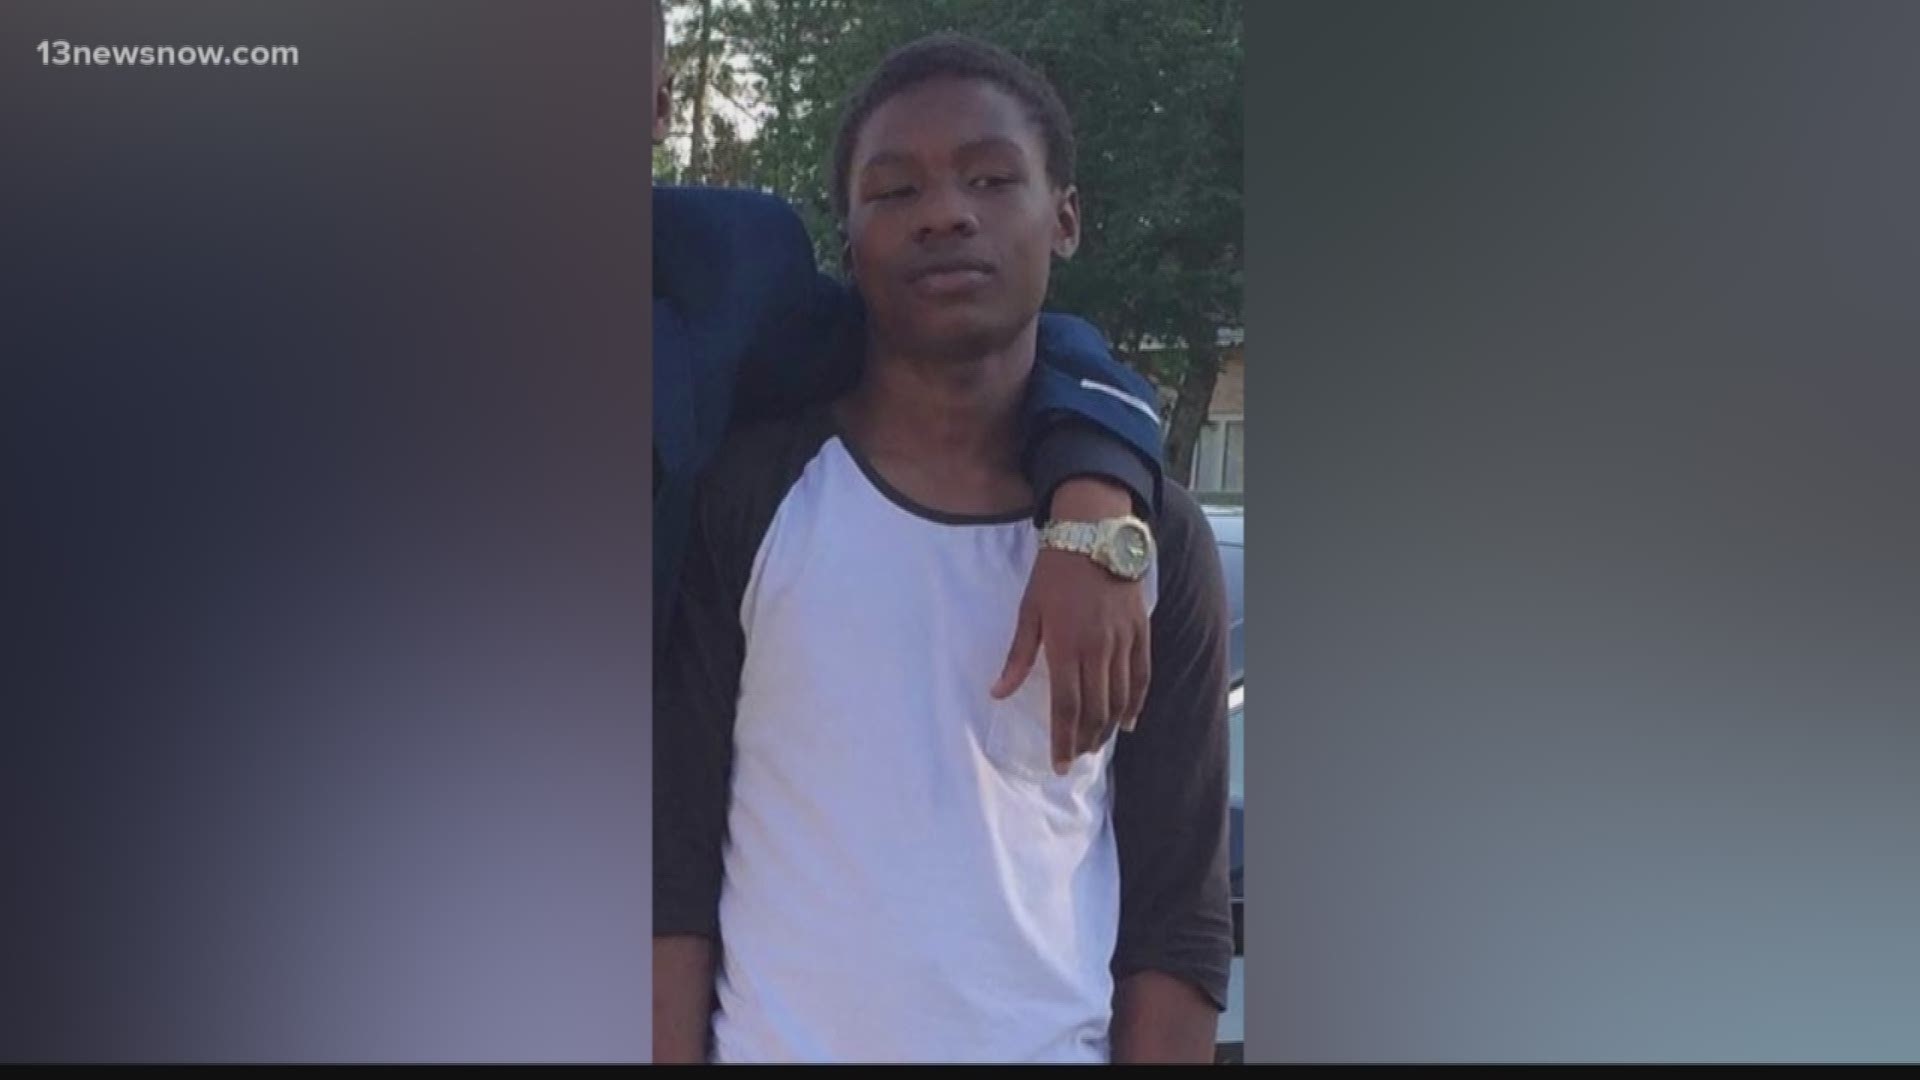 A 16-year-old was shot and killed in Portsmouth and two others were injured.